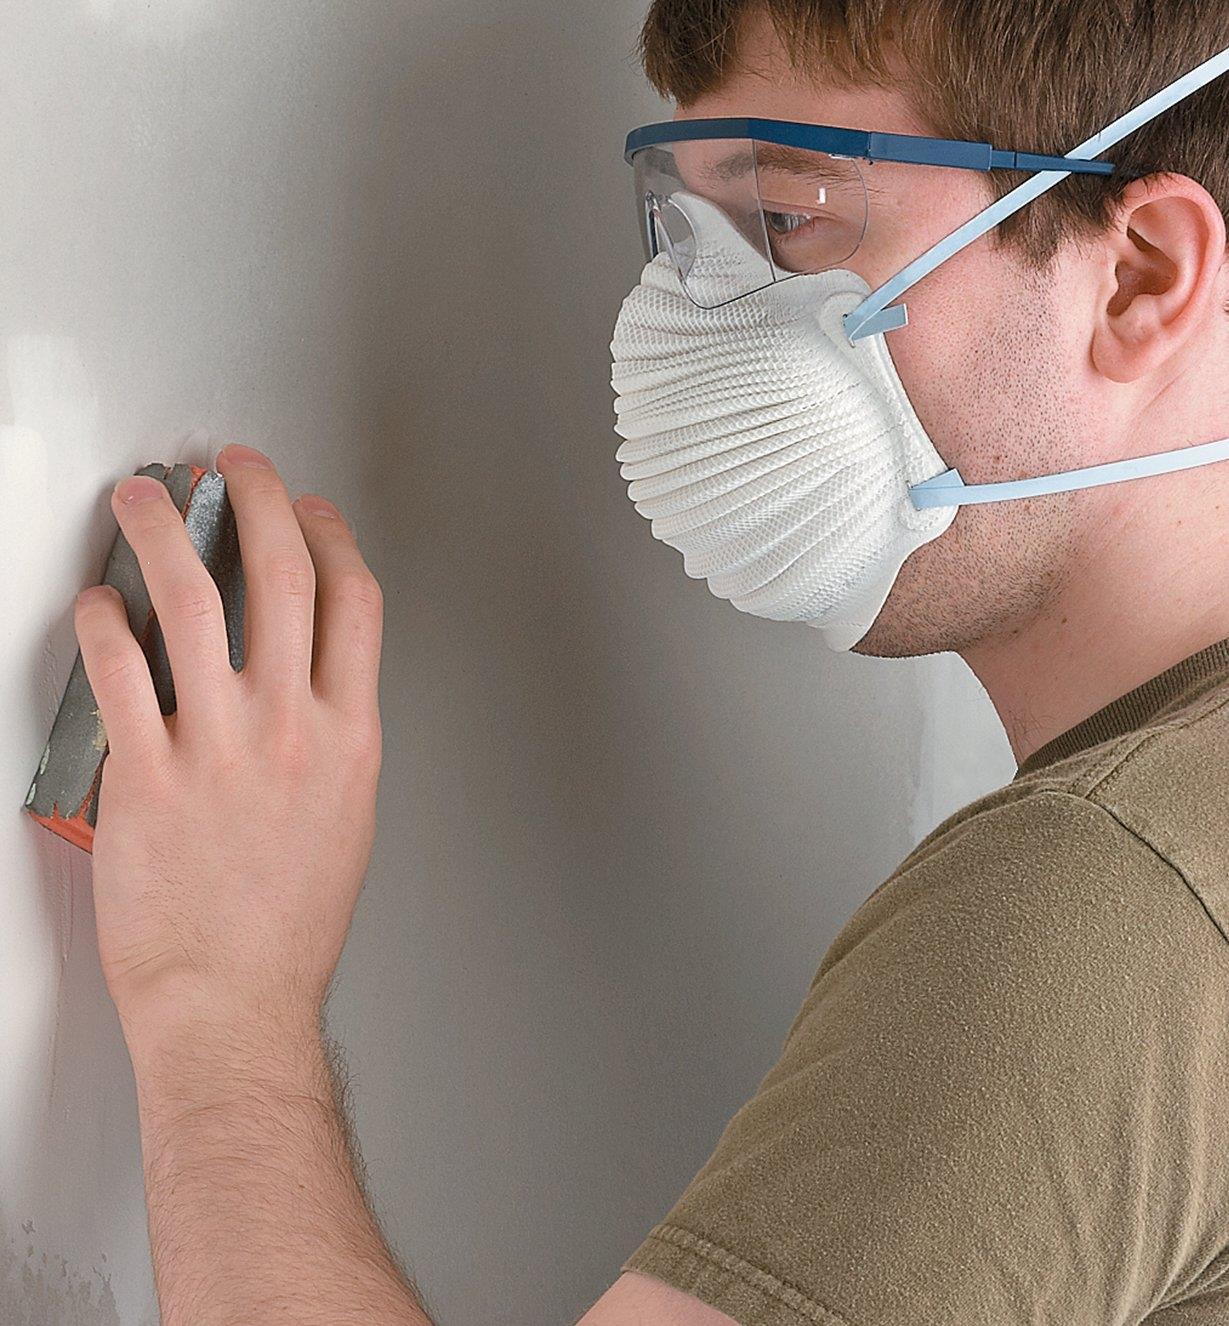 A person wears an Airwave disposable dust mask while sanding a wall